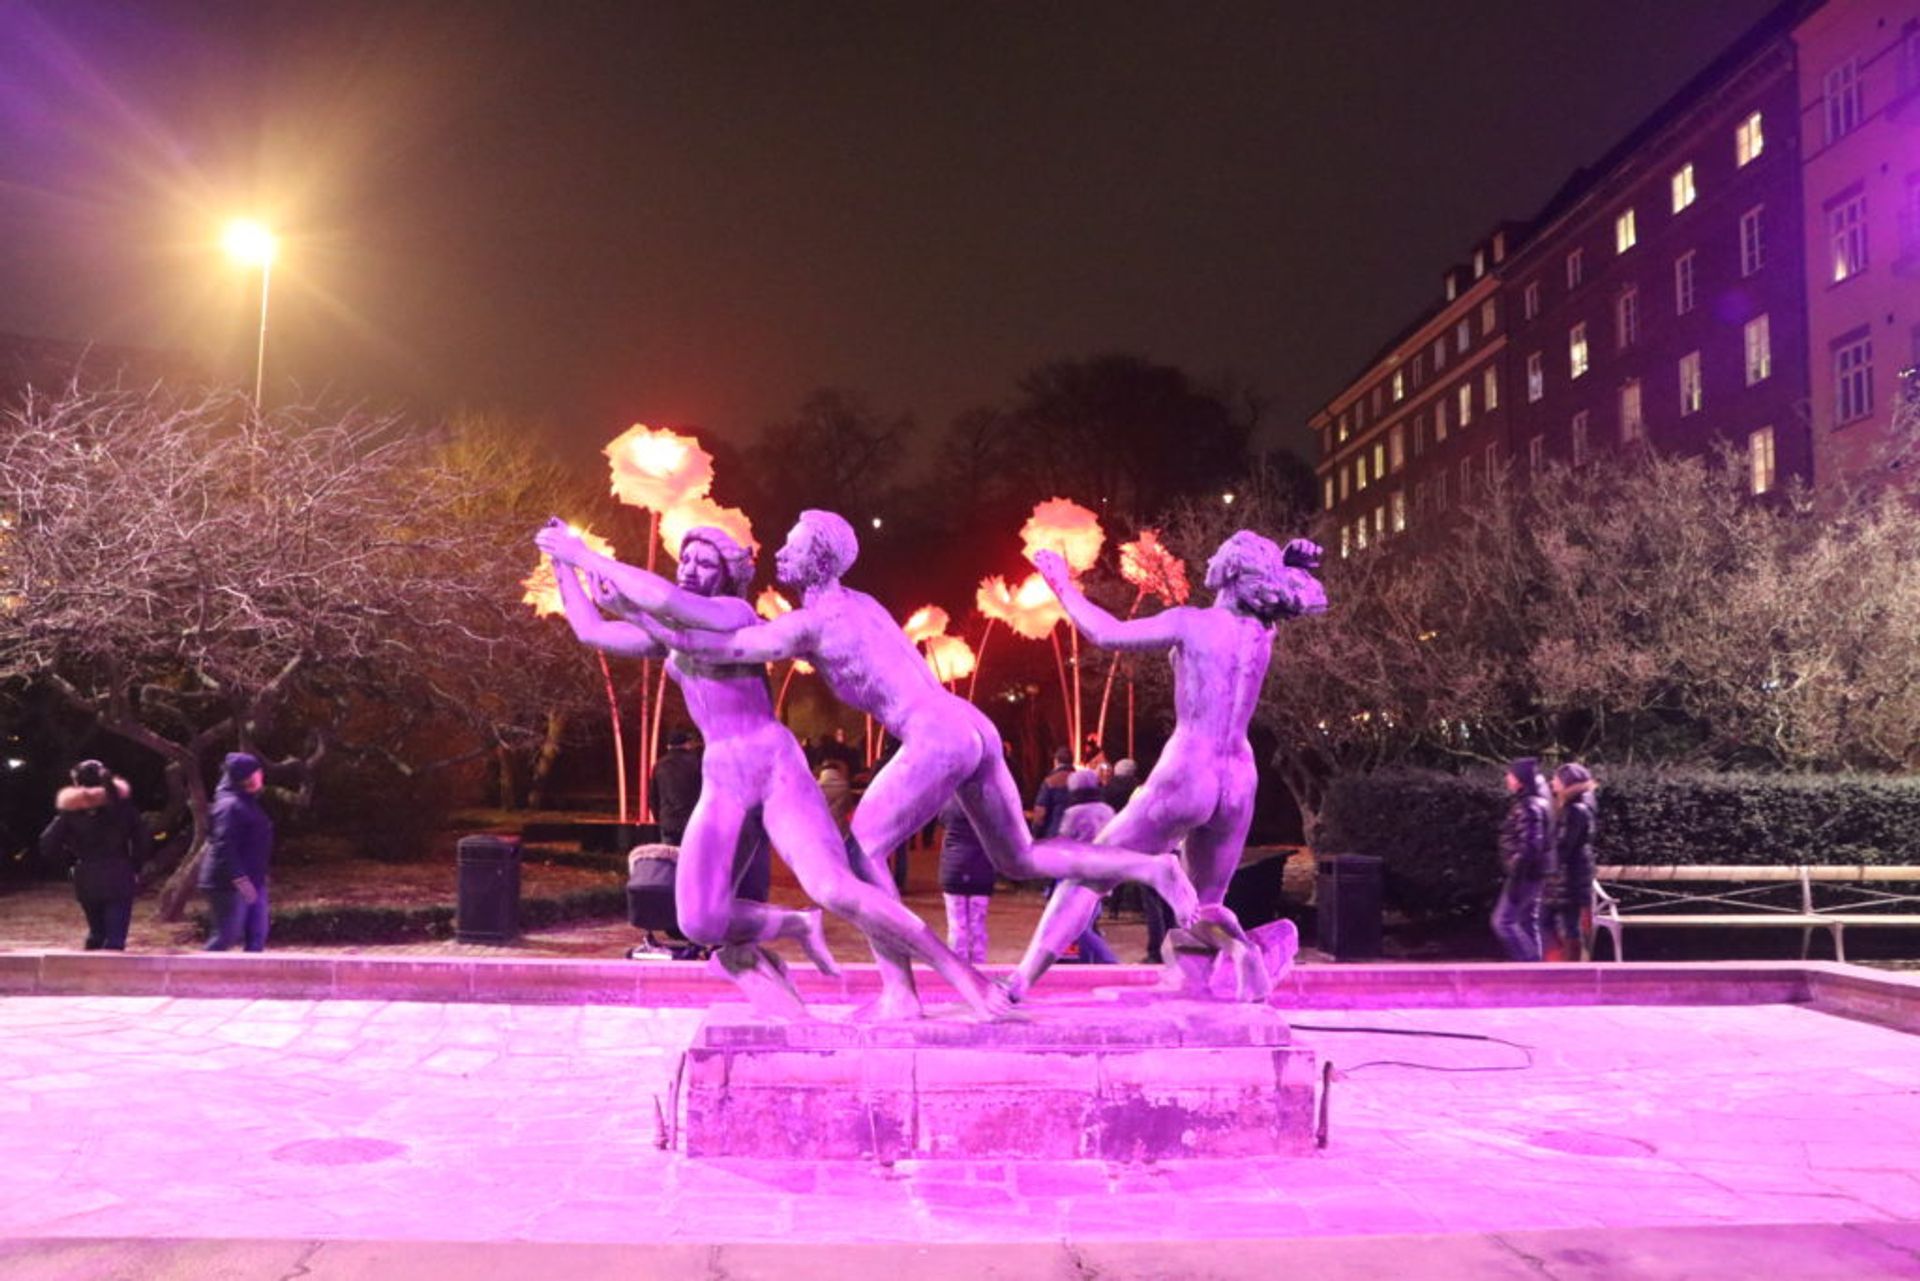 a photo of the Illuminated statue fountain in Saint Jorgens place, by Axel Wallenberg. /Sanjay